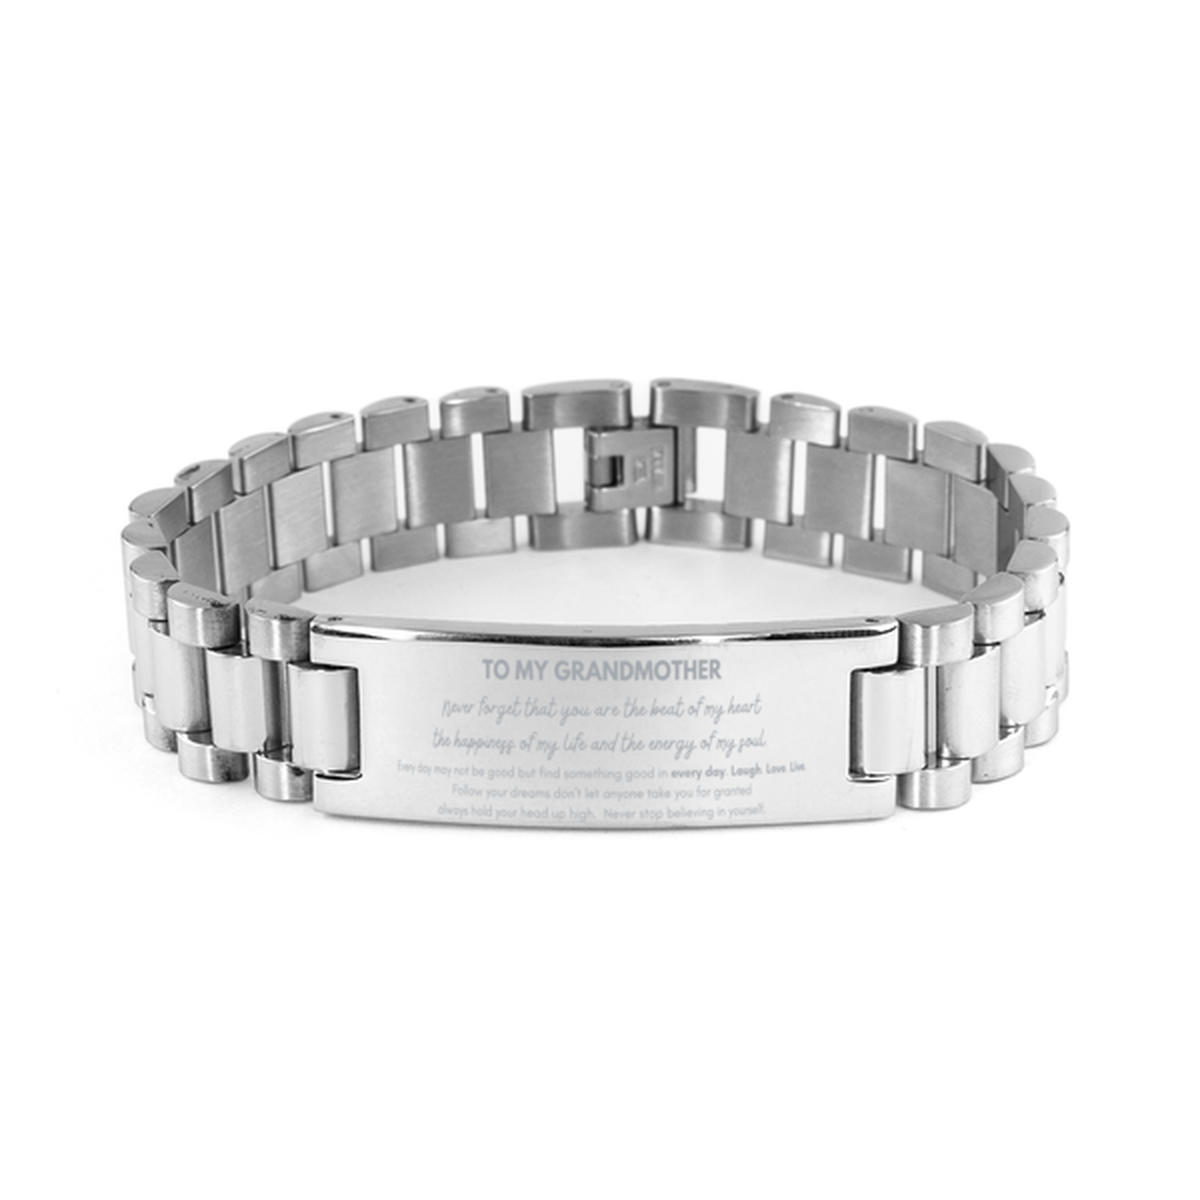 To My Grandmother Bracelet Gifts, Christmas Grandmother Ladder Stainless Steel Bracelet Present, Birthday Unique Motivational For Grandmother, To My Grandmother Never forget that you are the beat of my heart the happiness of my life and the energy of my s